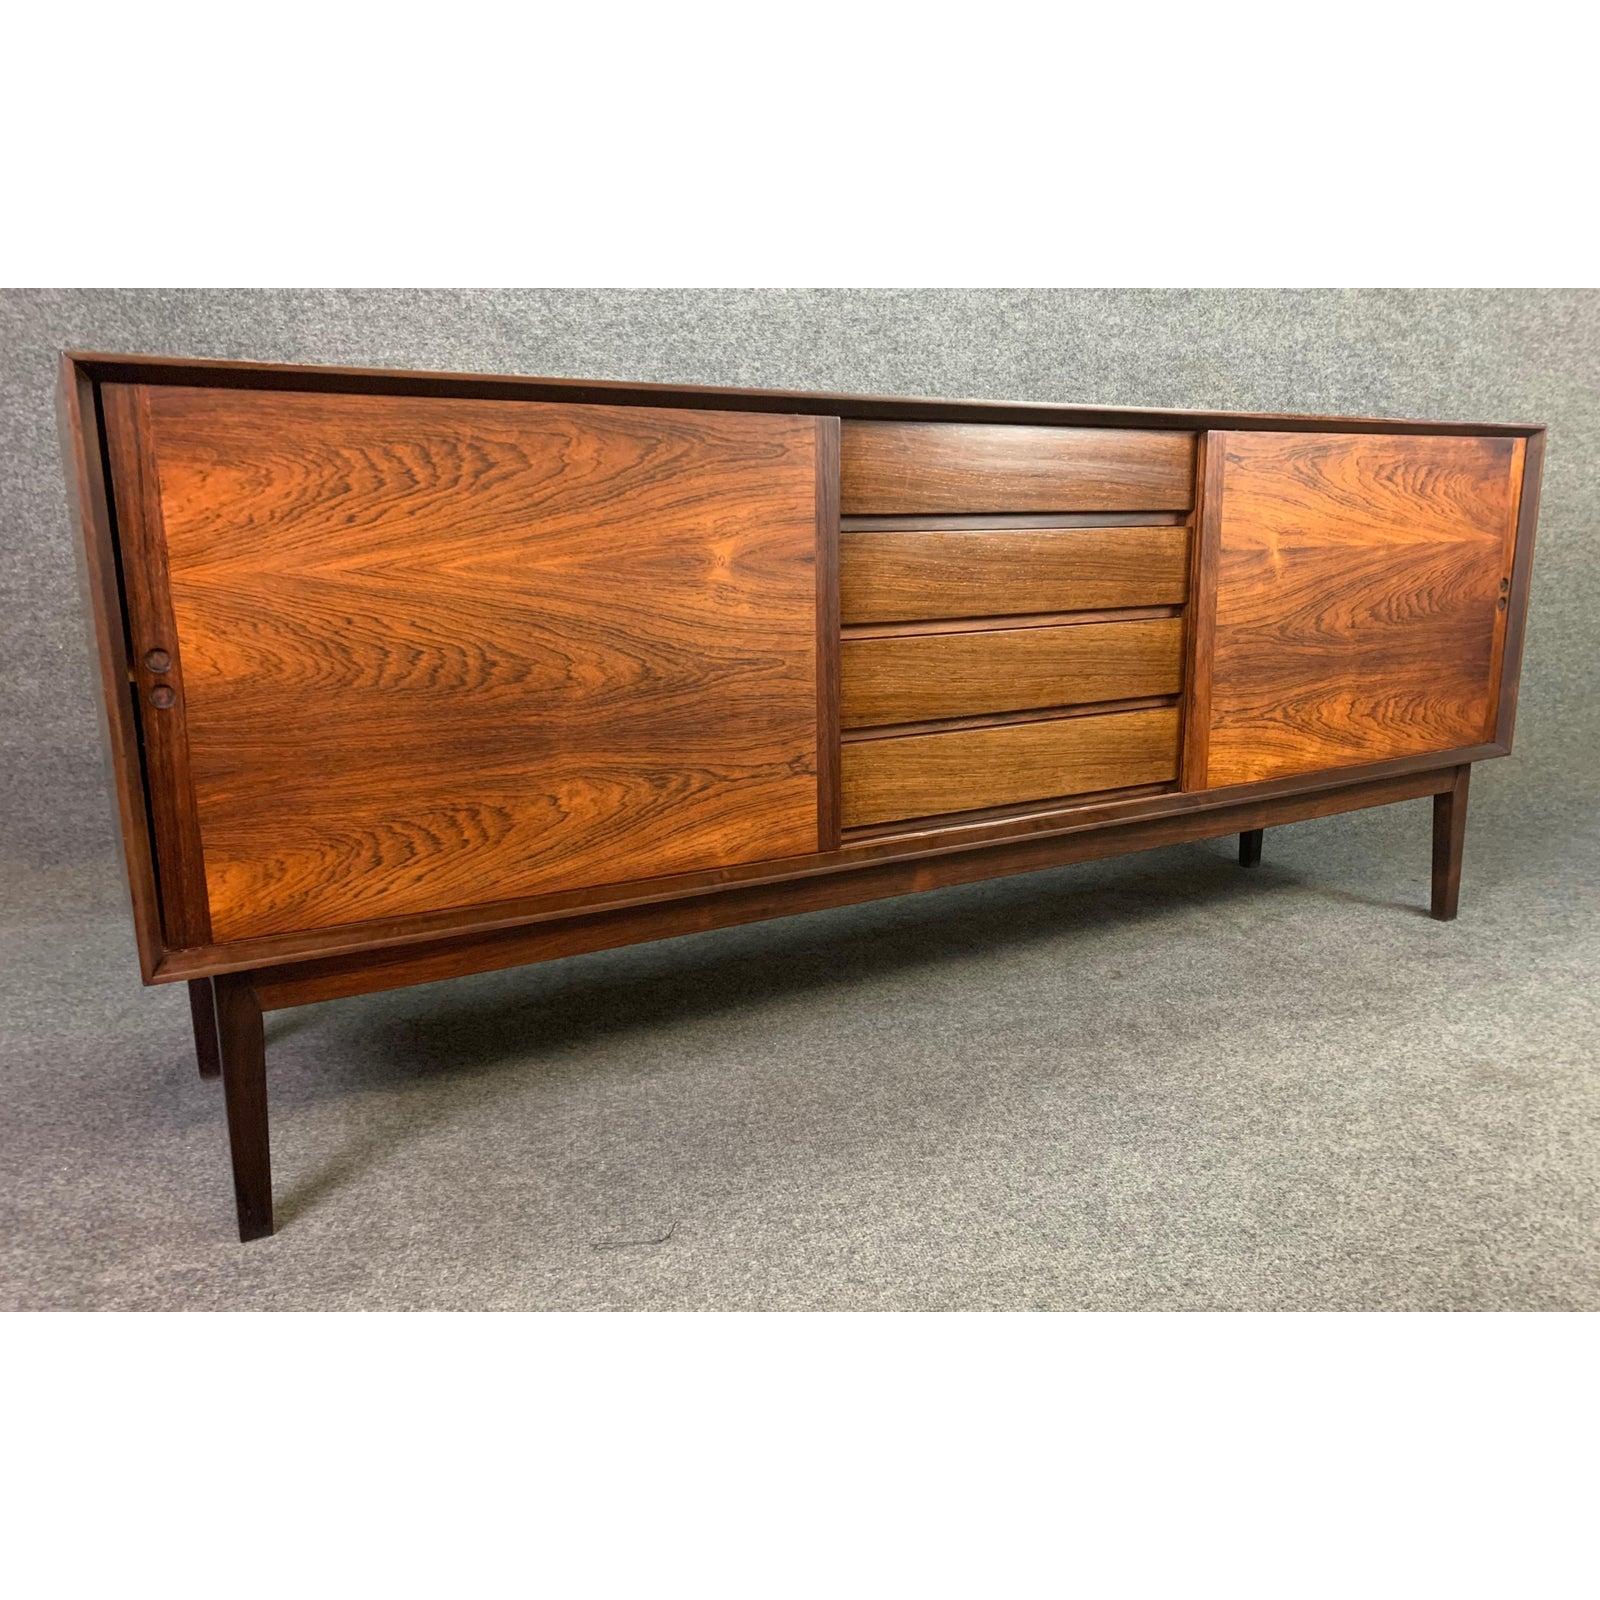 Here is a special sideboard in rosewood manufactured by Hornslet Mobelfarik in Denmark in the 1960s.
This exquisite piece features a vibrant wood grain, a flushed marble tray/insert on its top, two sliding doors revealing storage with adjustable